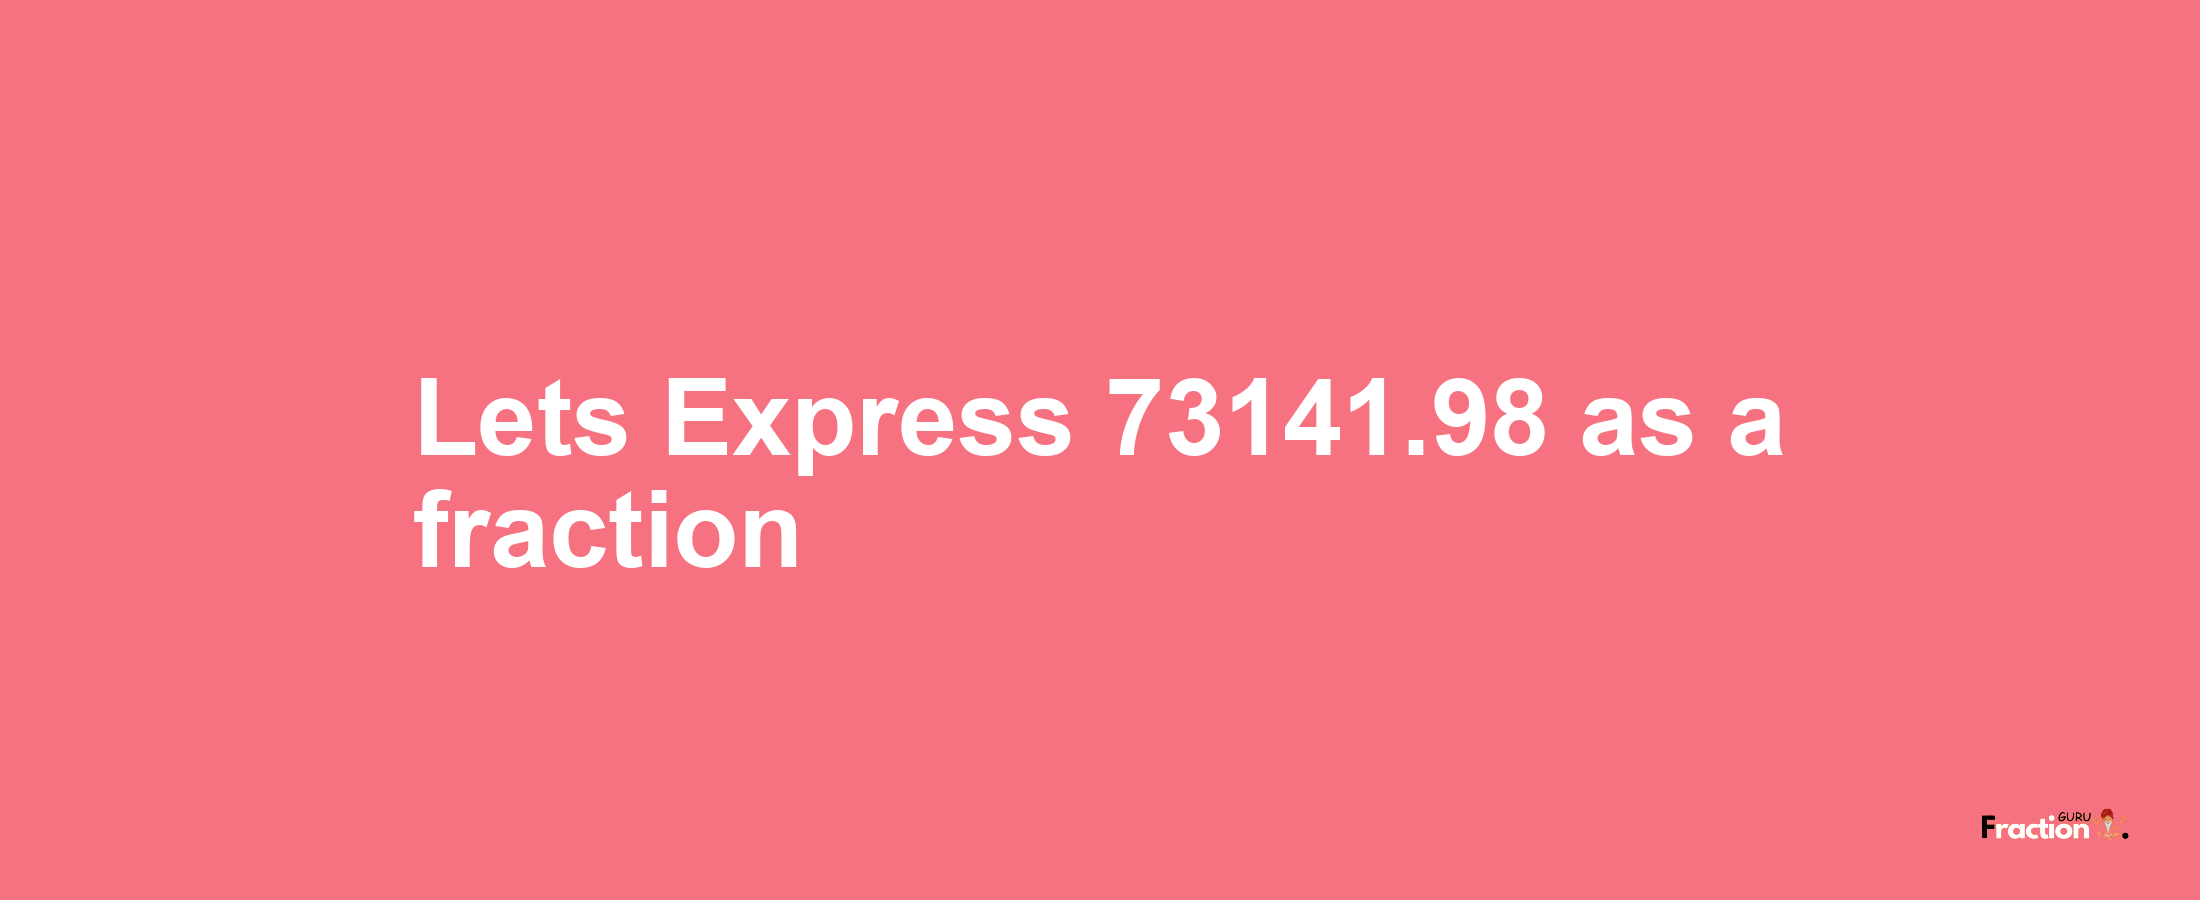 Lets Express 73141.98 as afraction